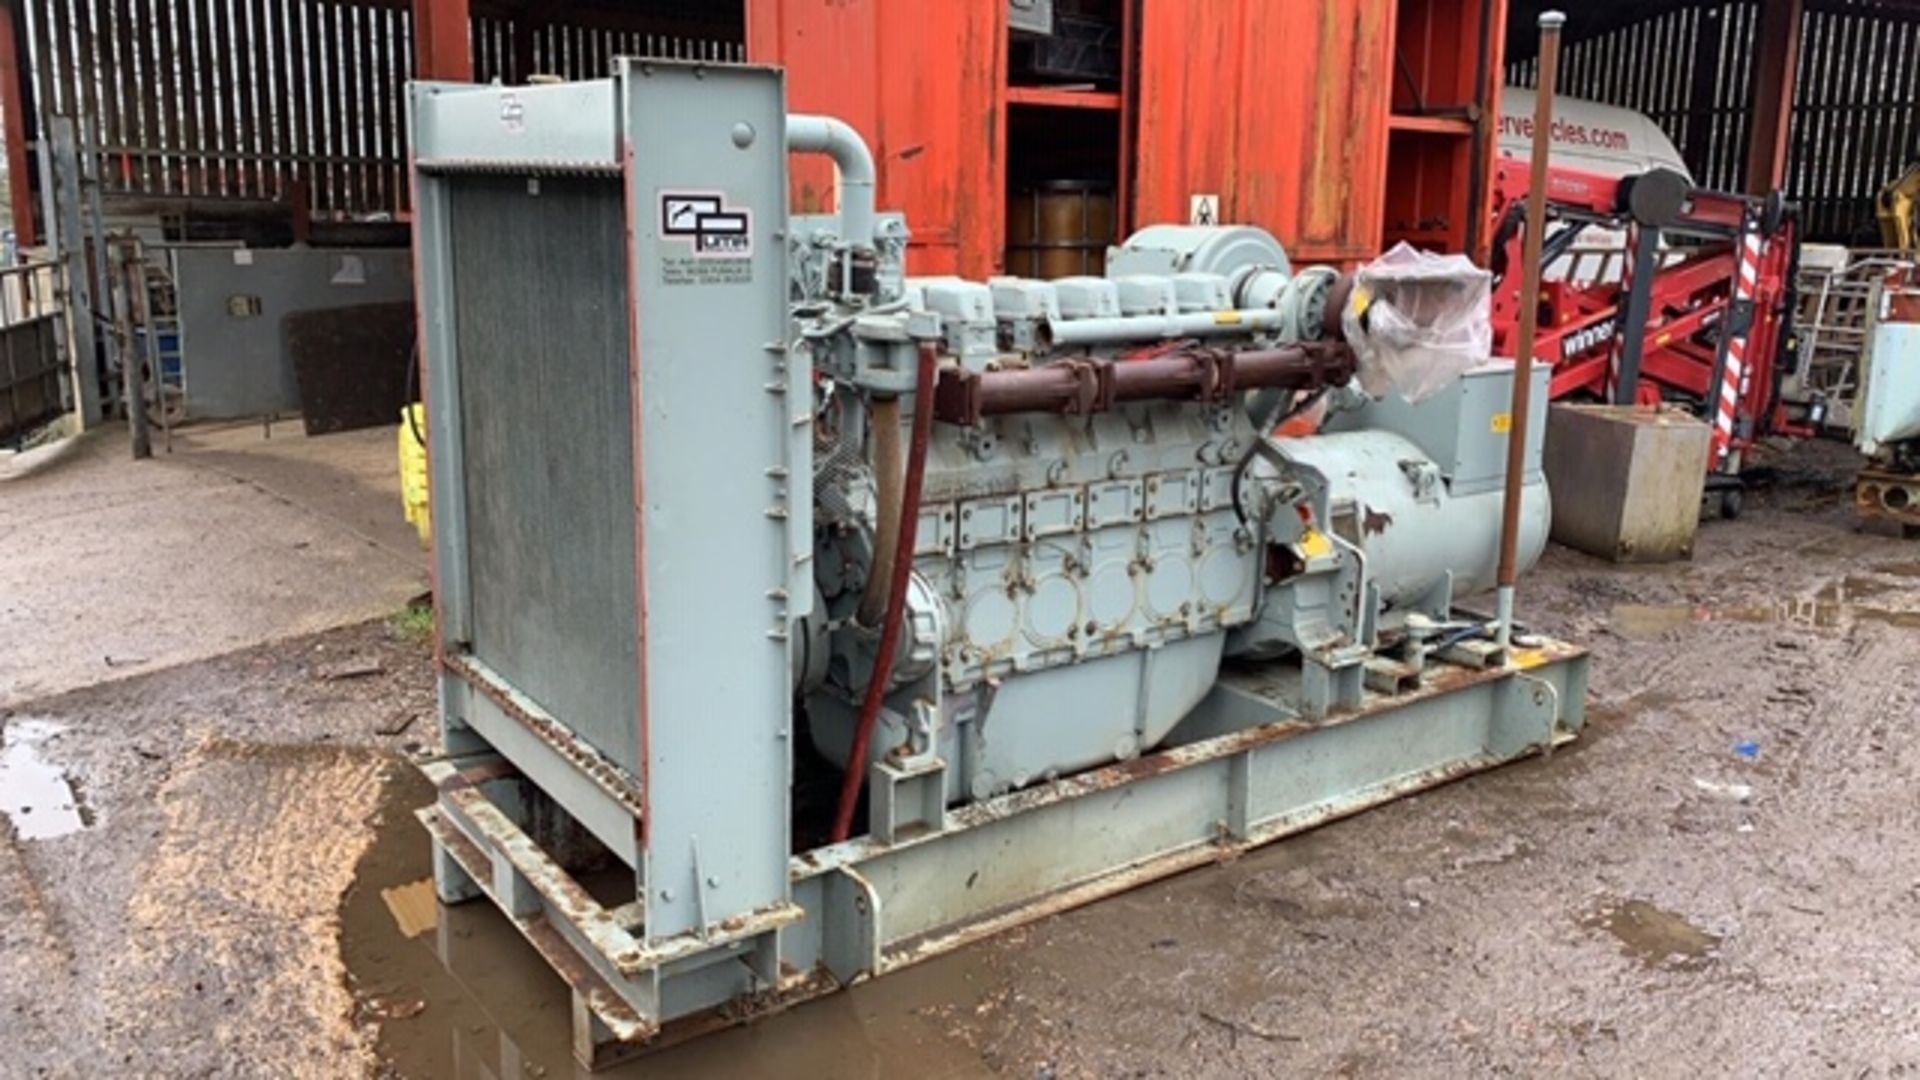 DORMAN 6 CYLINDER DIESEL ENGINED GENERATOR, FROM PAPERWORK BELIEVED TO BE 500KVA APPROX. 590HP